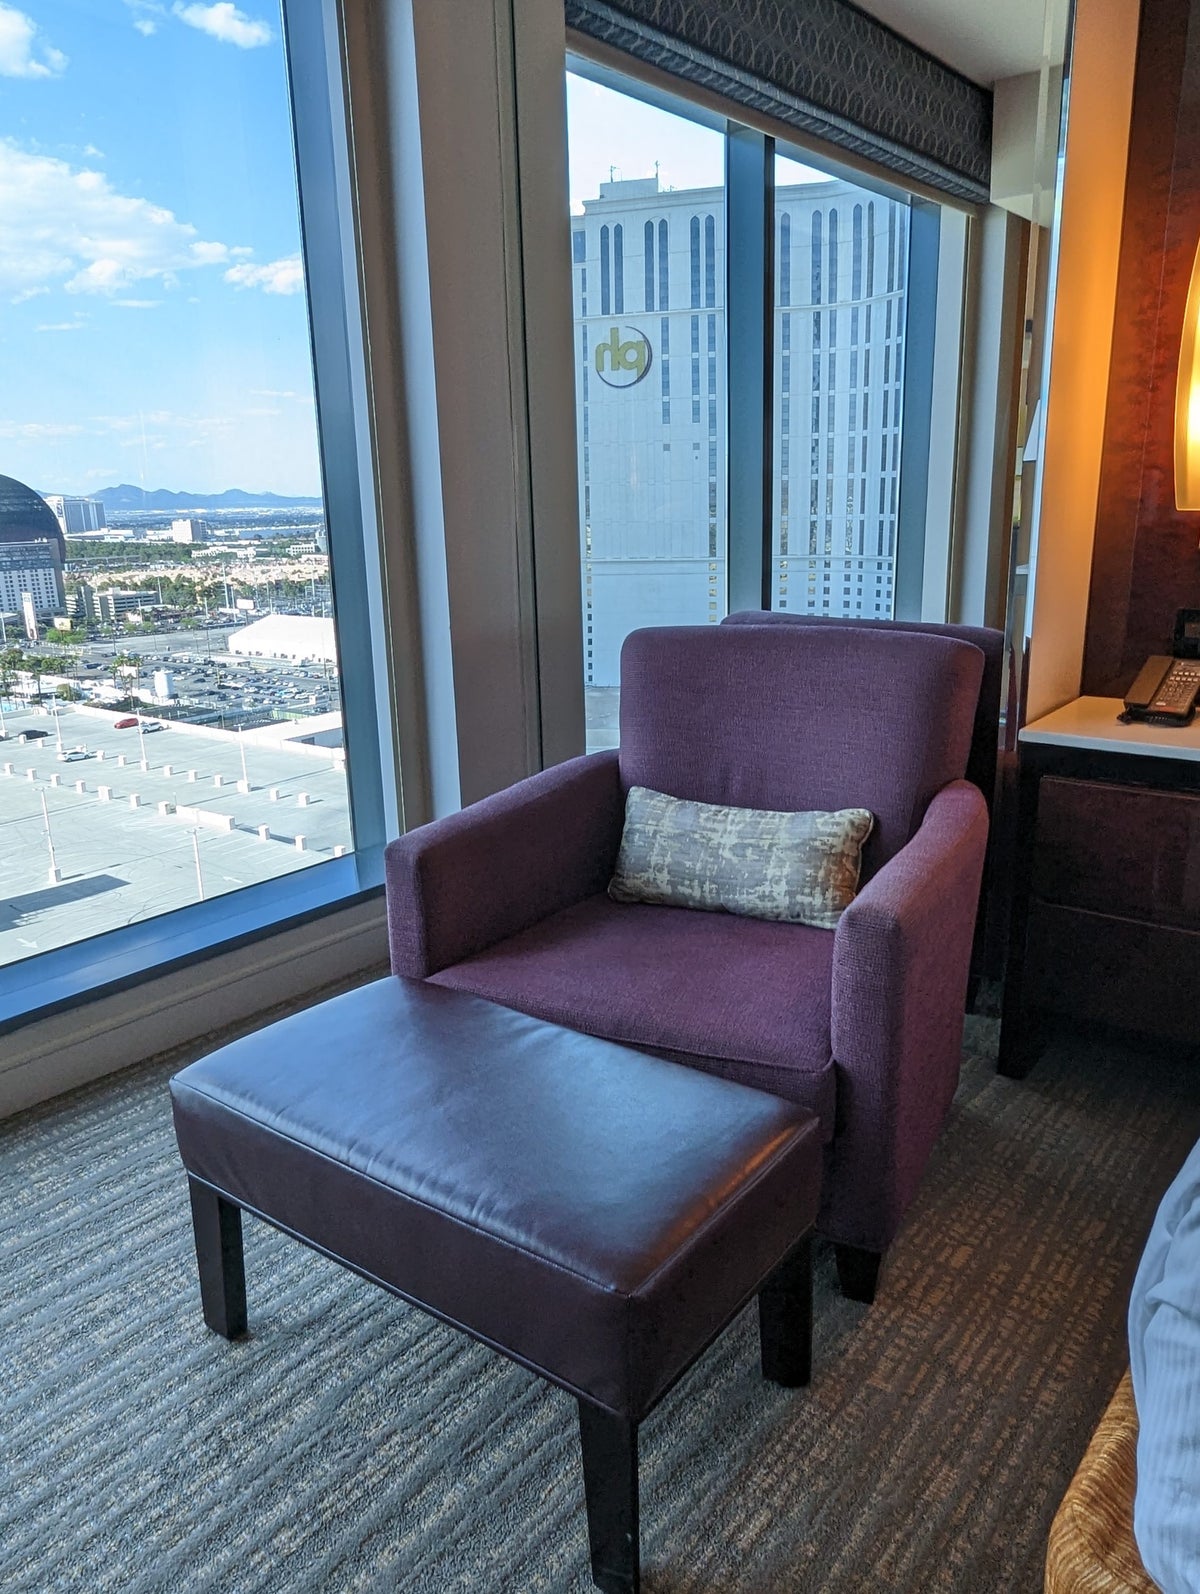 Hilton Grand Vacations Elara Las Vegas bedroom chair with a view